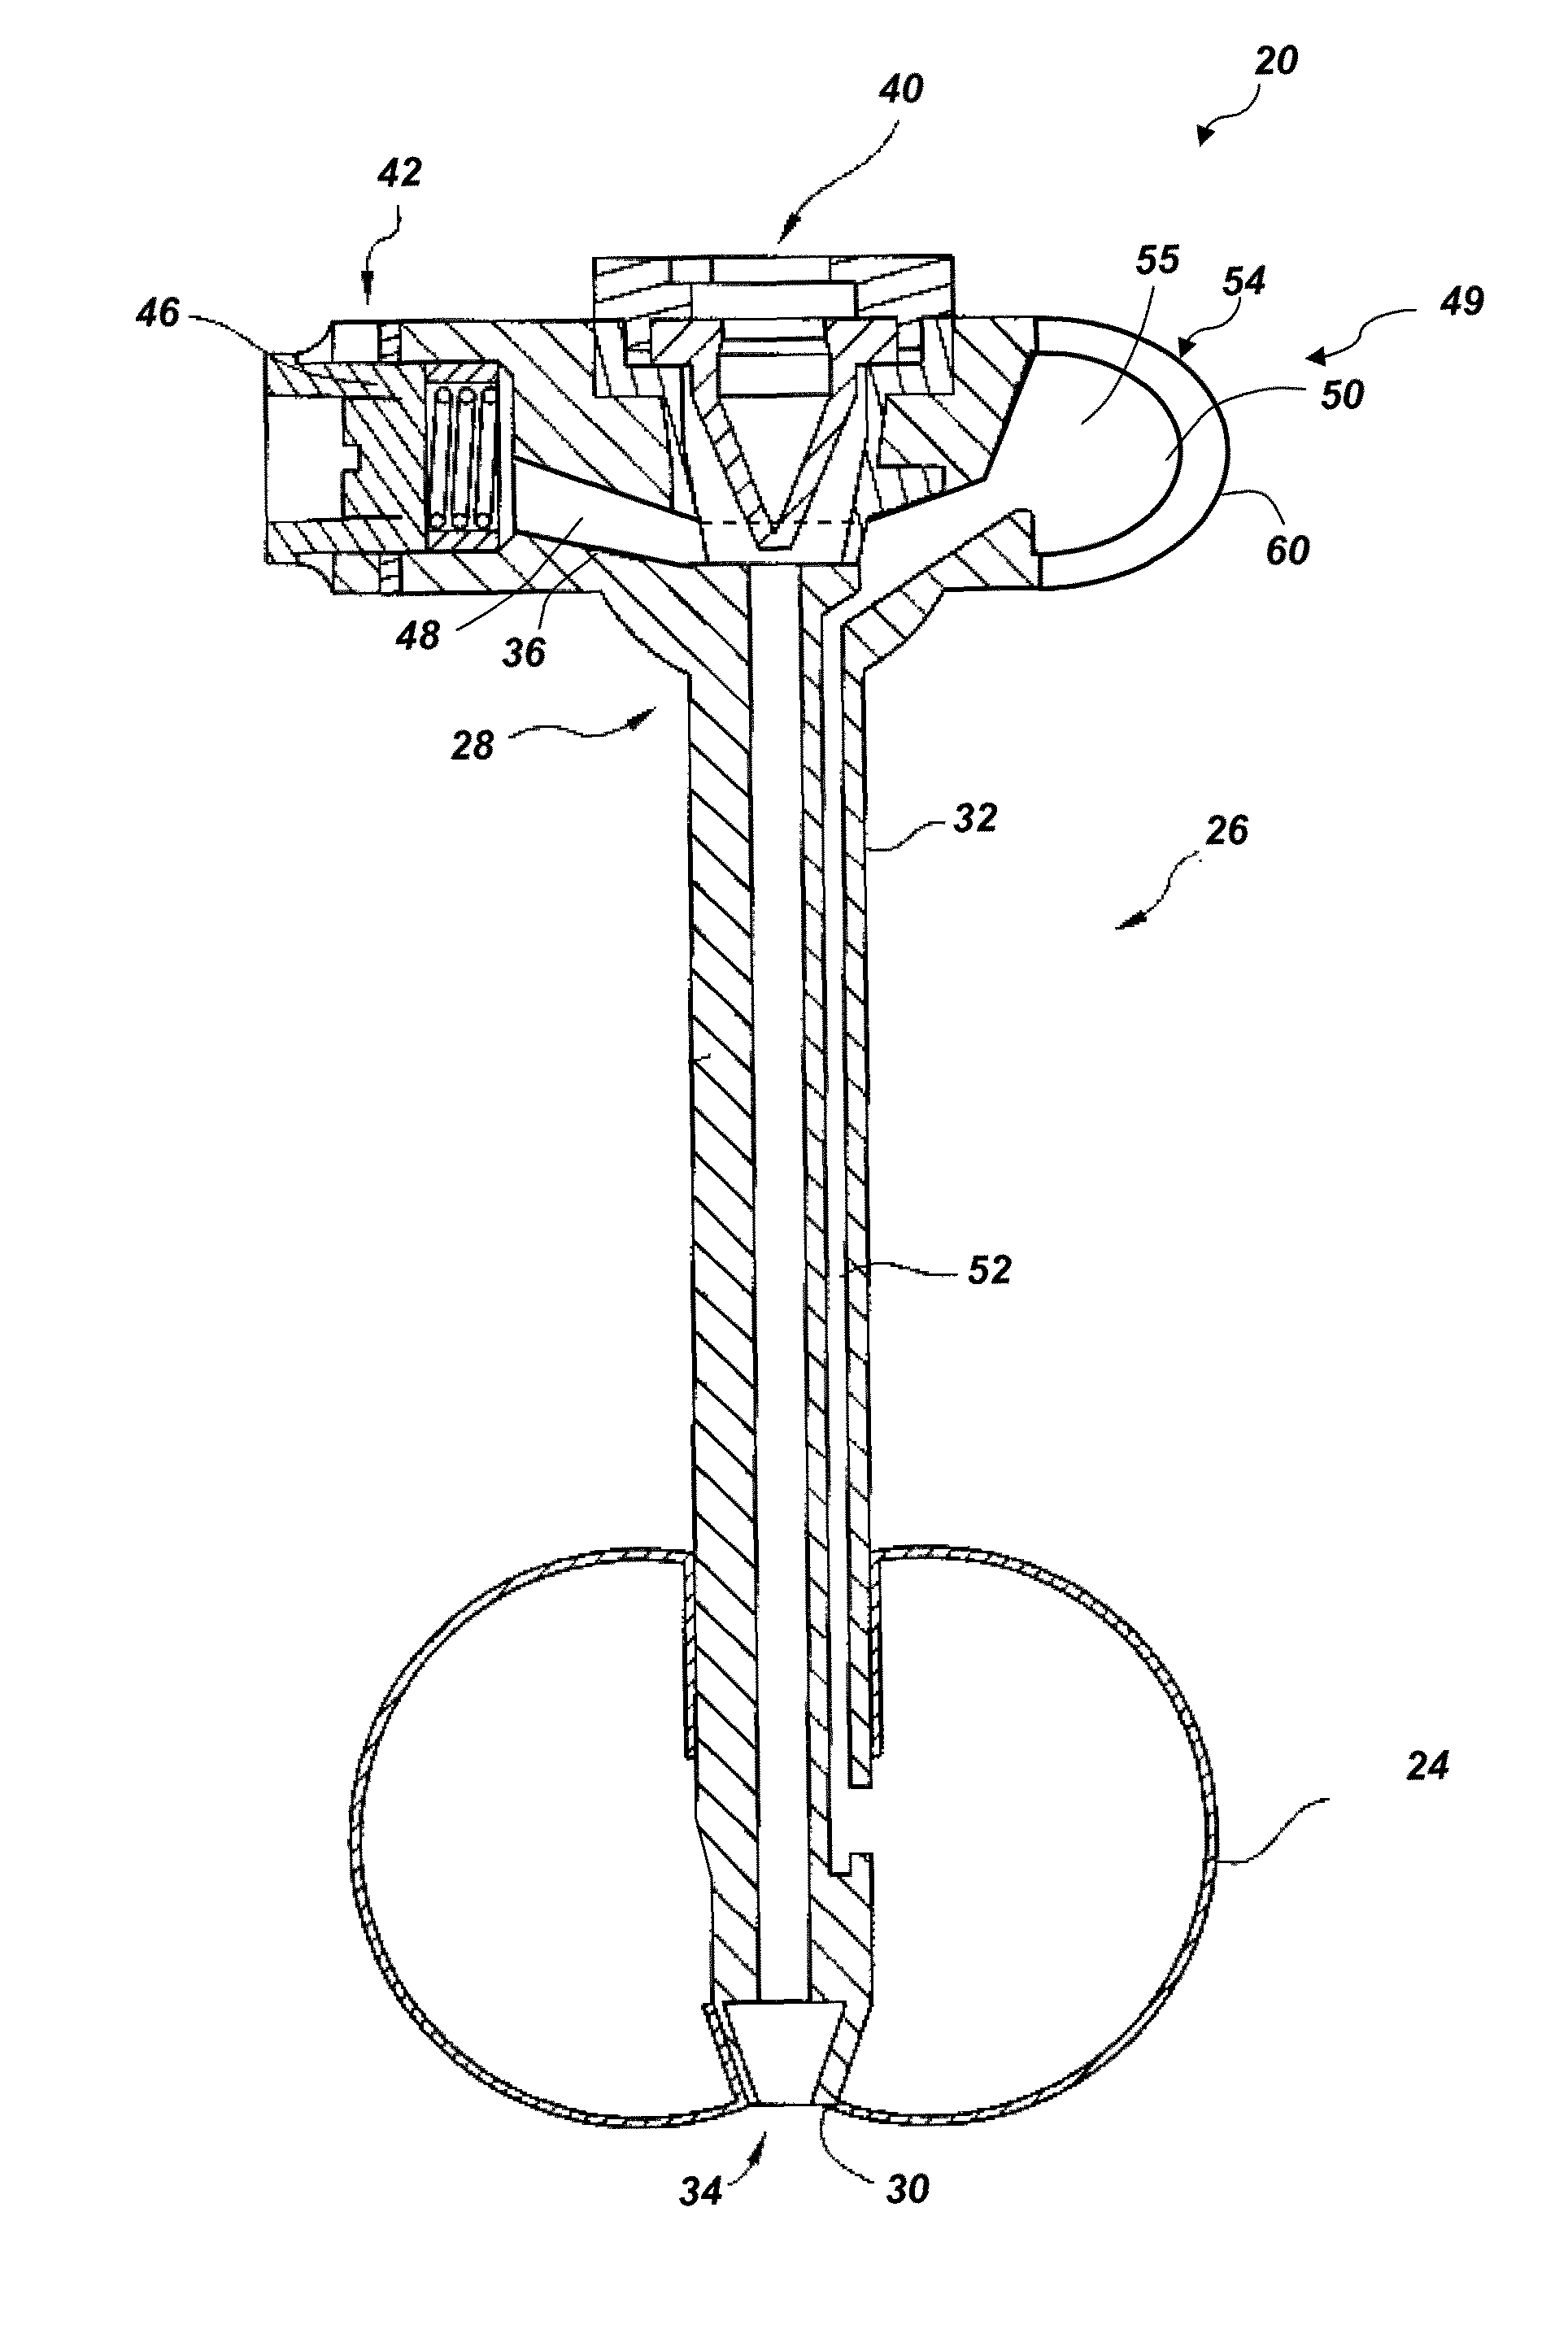 Enteral feeding catheter device with an indicator